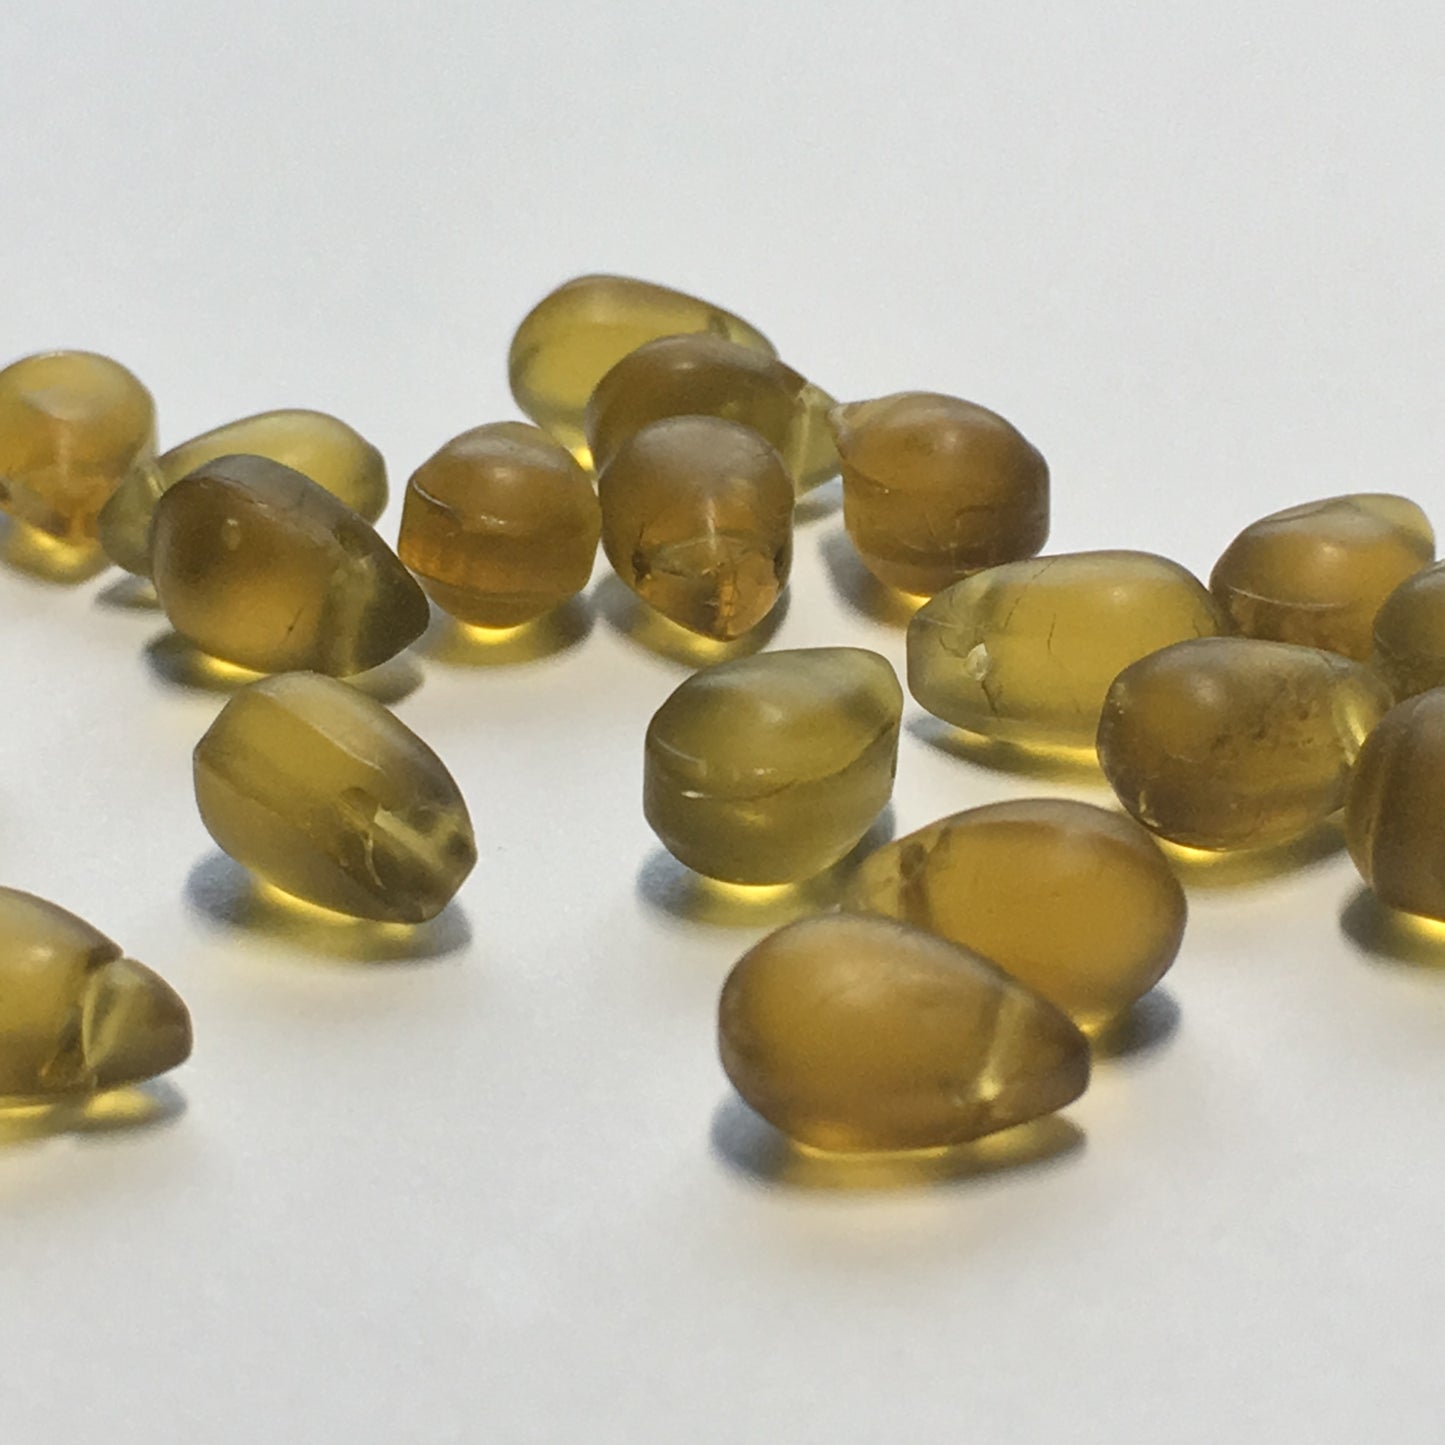 Frosted Olive Gold  Pressed Glass Teardrop Beads, 3 x 9 x 5 mm, 20 Beads